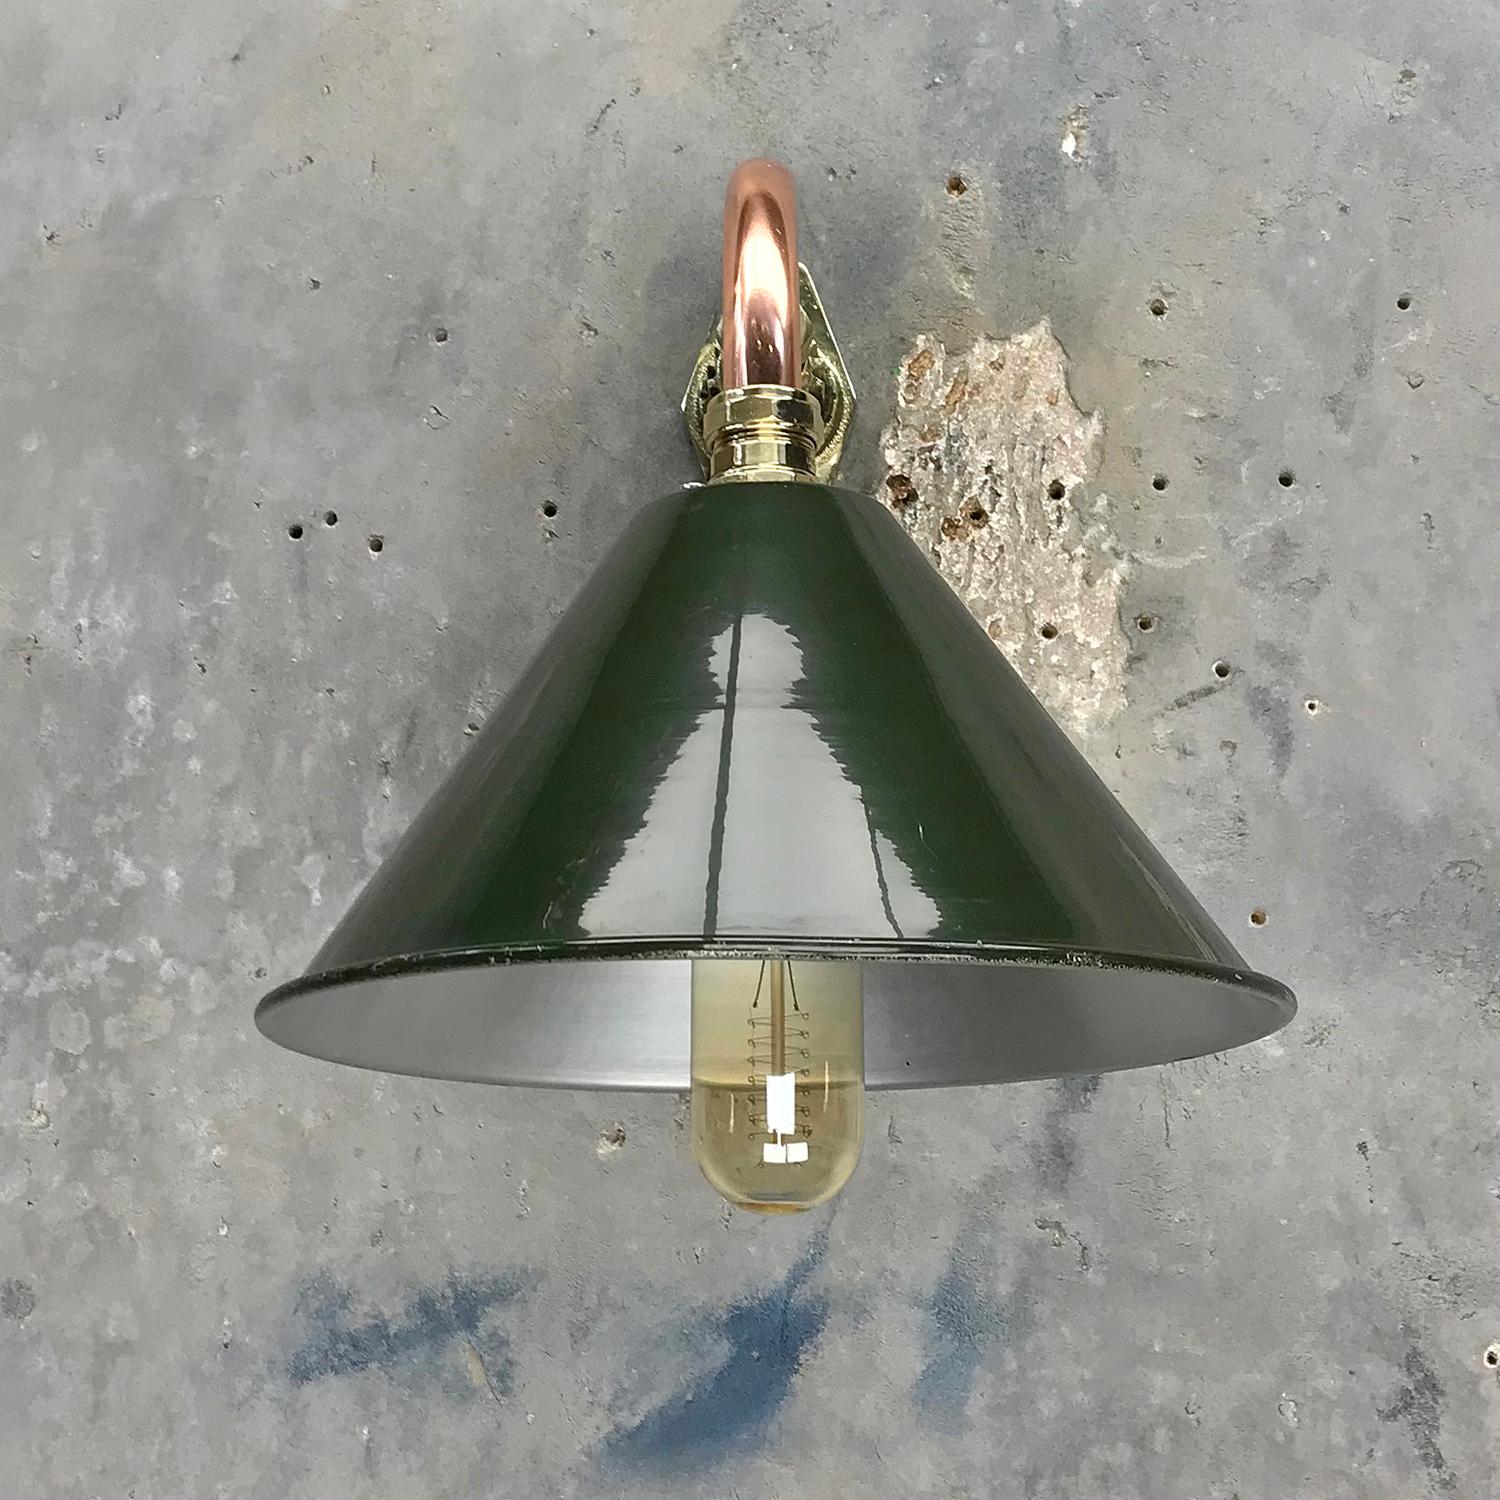 1980s Ex British Army Light Shade / Copper and Brass Cantilever, Original Green For Sale 4